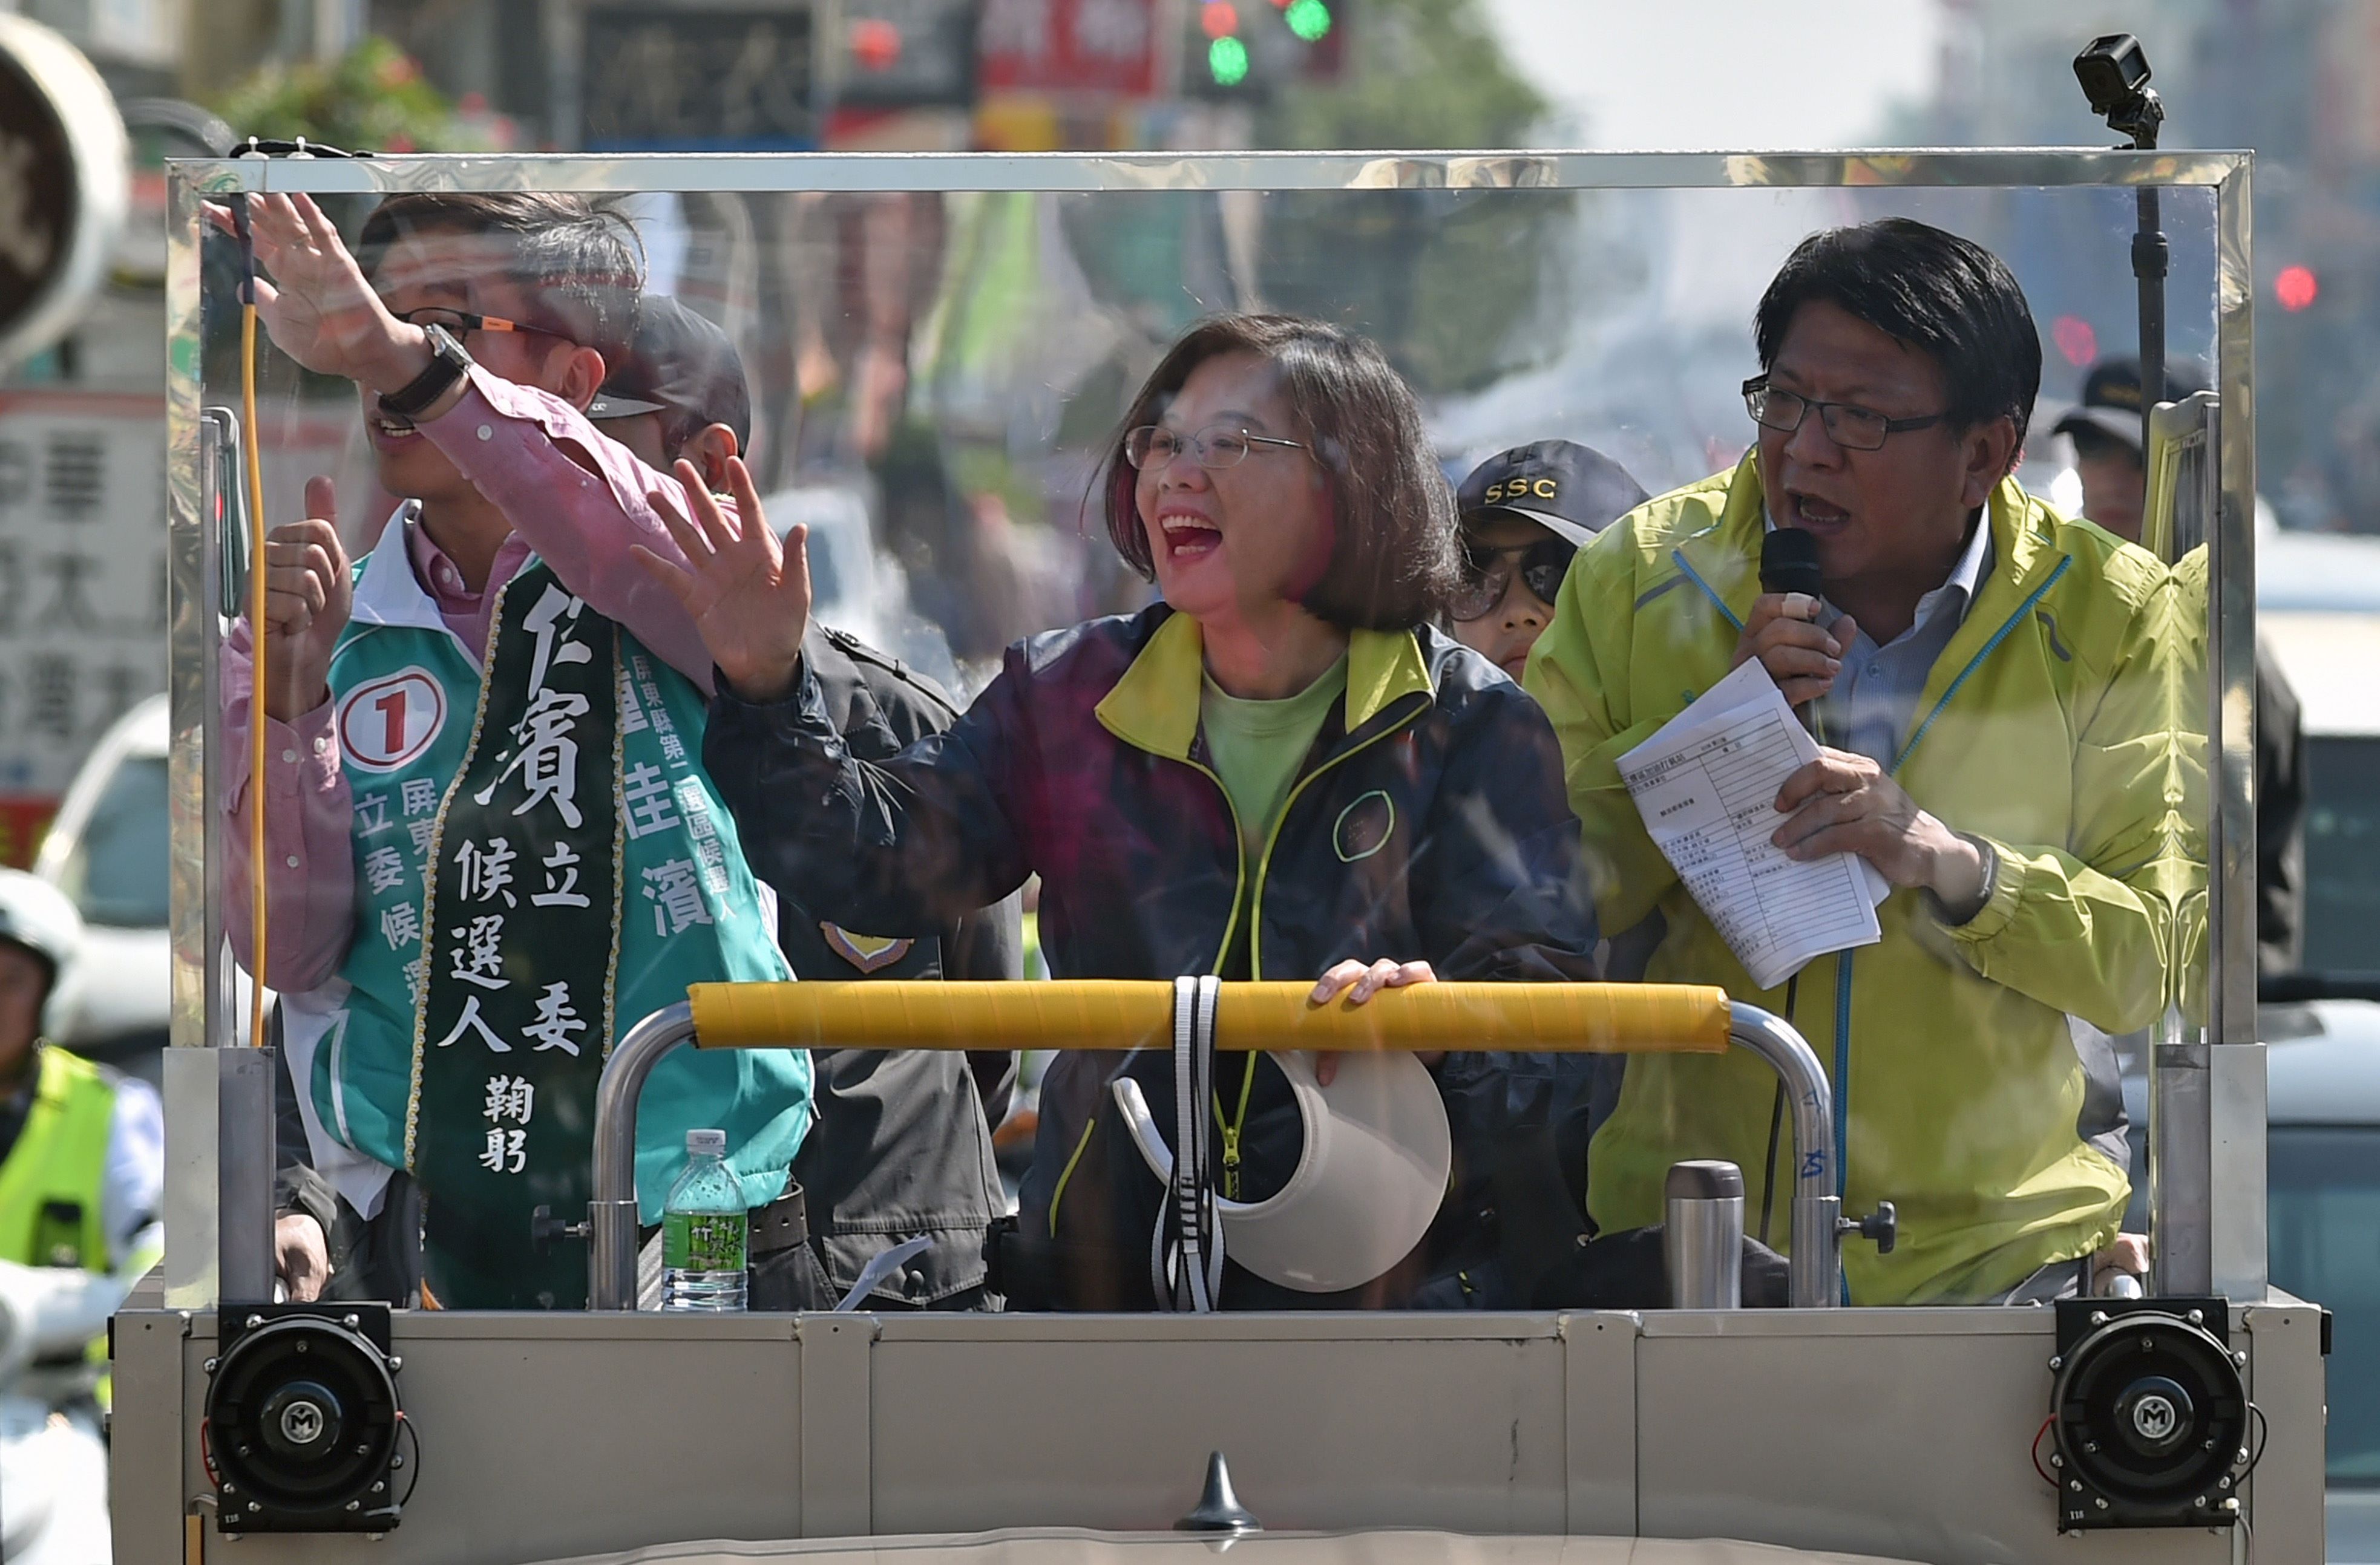 Tsai Ing-wen (C), presidential candidate for Taiwan's main opposition Democratic Progressive Party (DPP), waves to supporters during an election campaign in southern Pingtung on January 9, 2016. Taiwan presidential frontrunner Tsai Ing-wen of the main opposition party kicked off the final week of campaigning in Fenggang village, her father's hometown in southern Pingtung county. AFP PHOTO / Sam Yeh